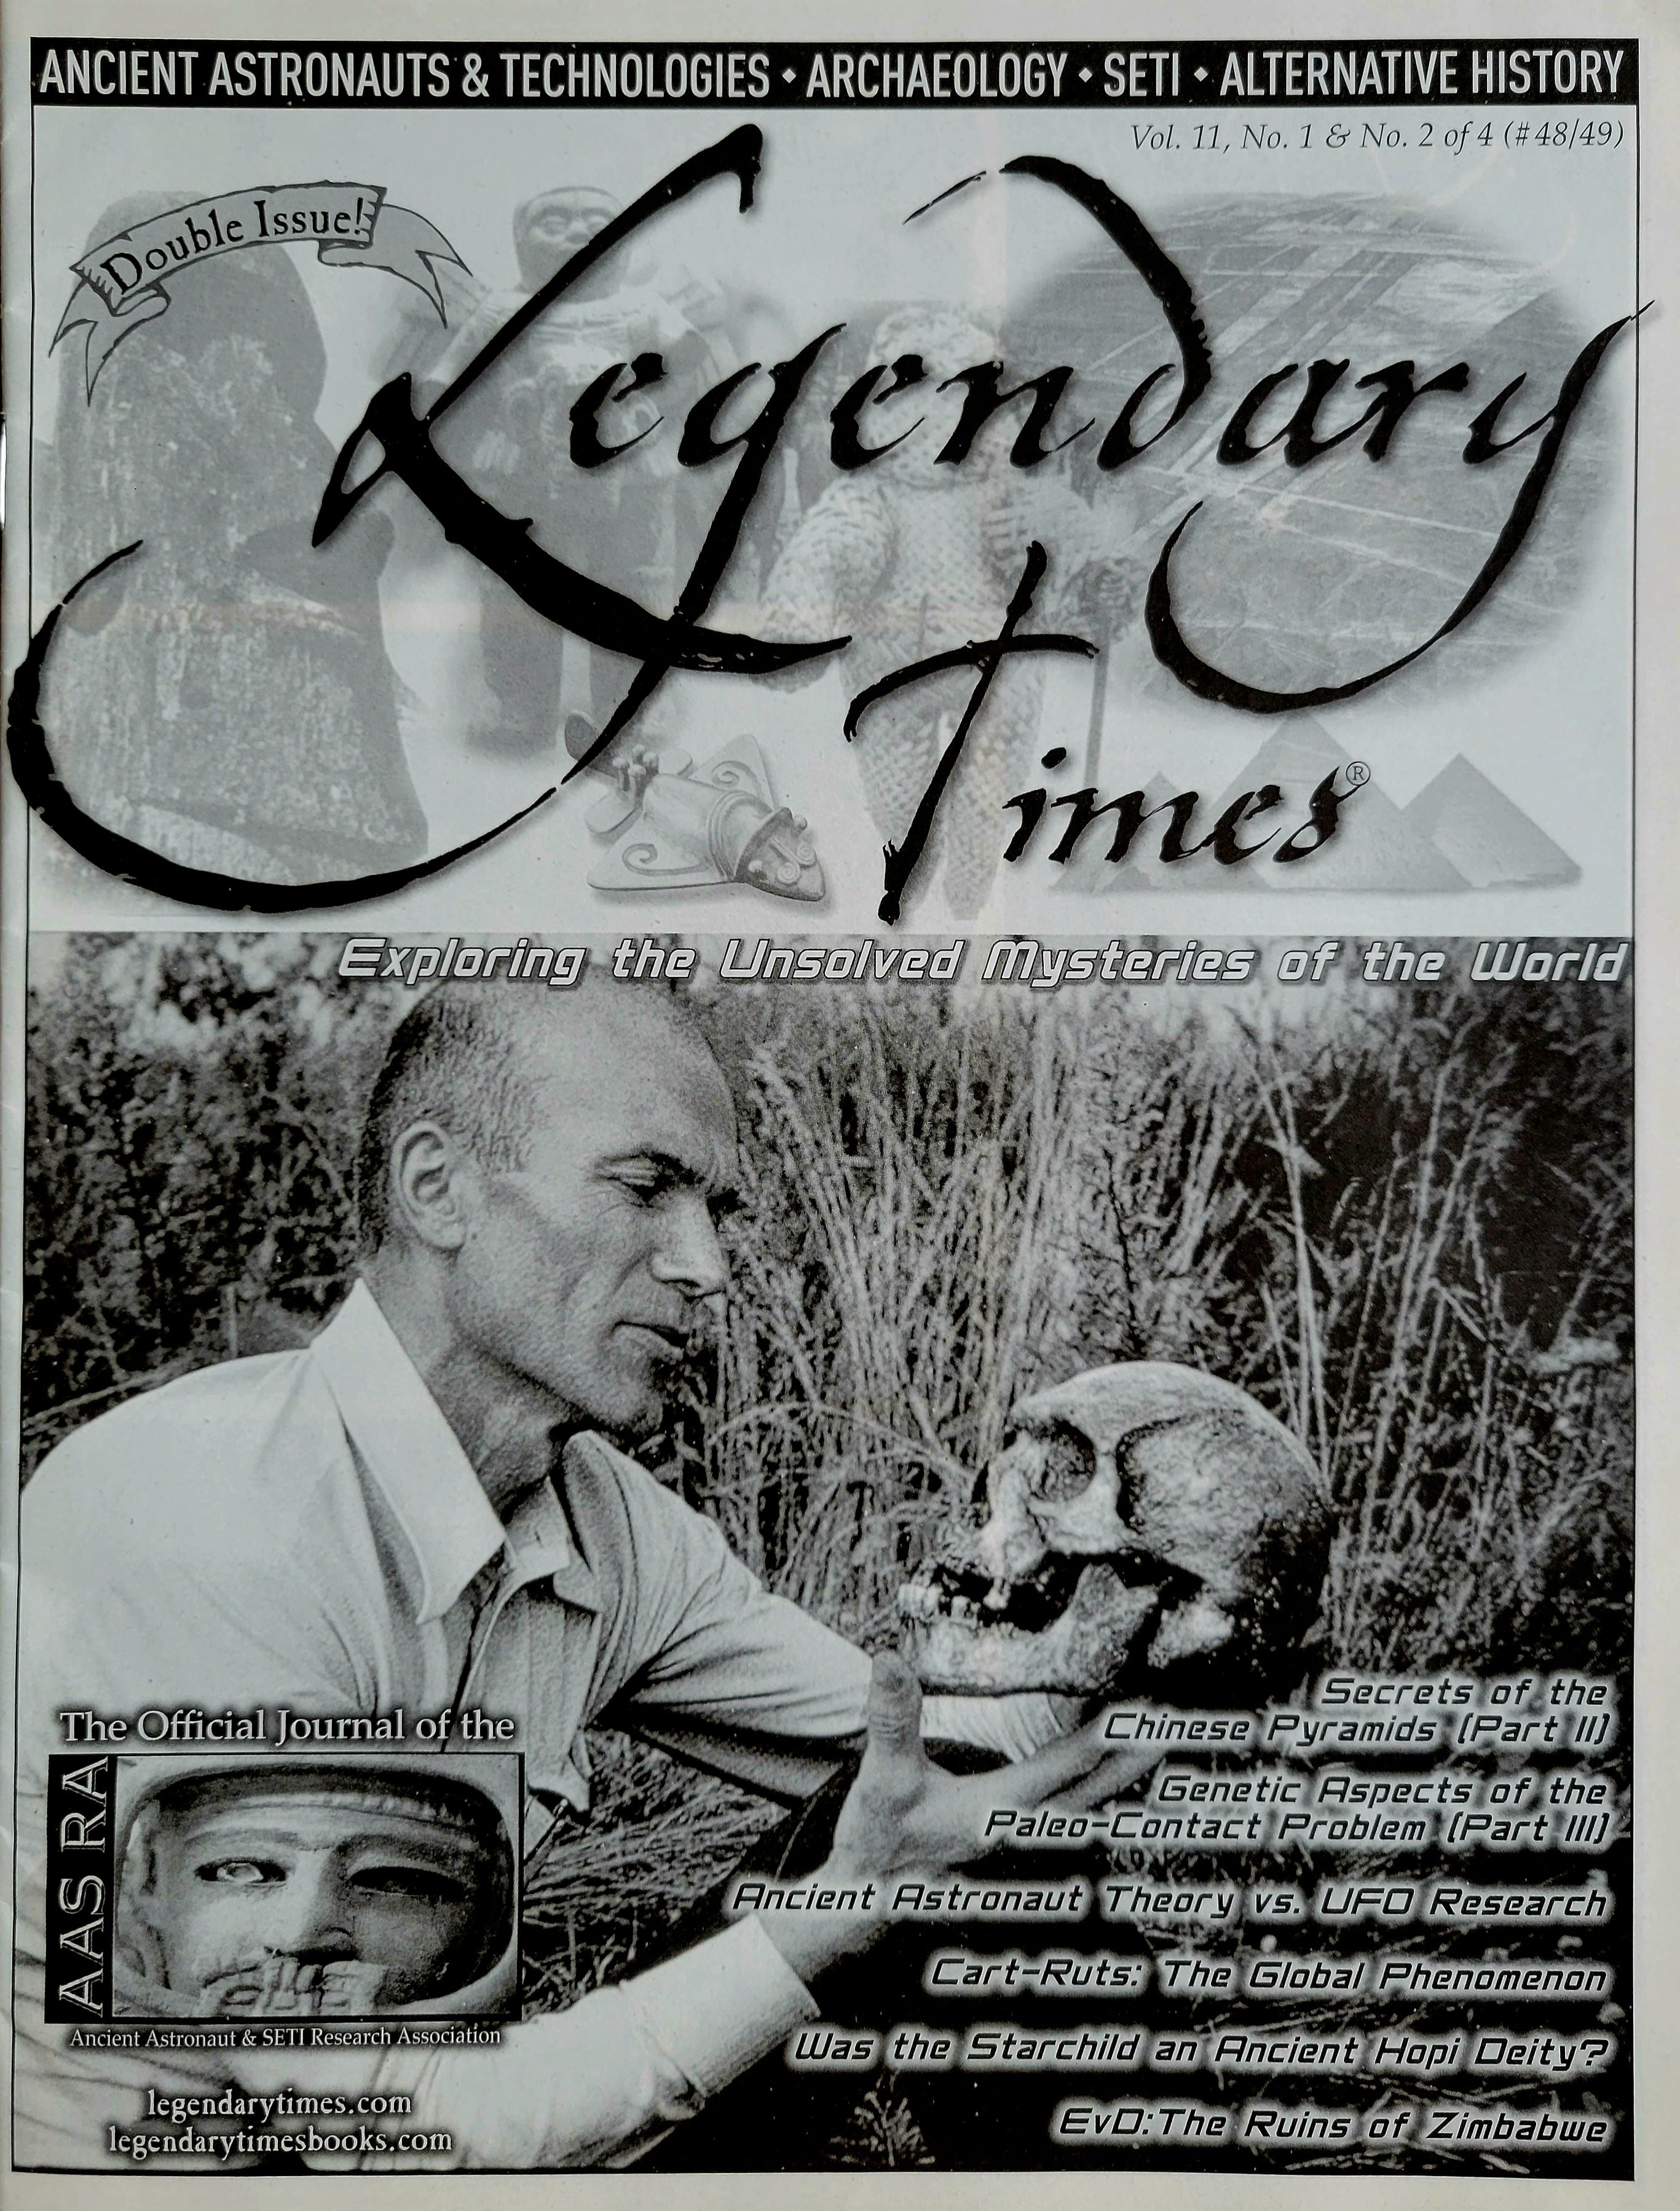 Legendary Times Magazine Anthropology Special (#48 & #49)